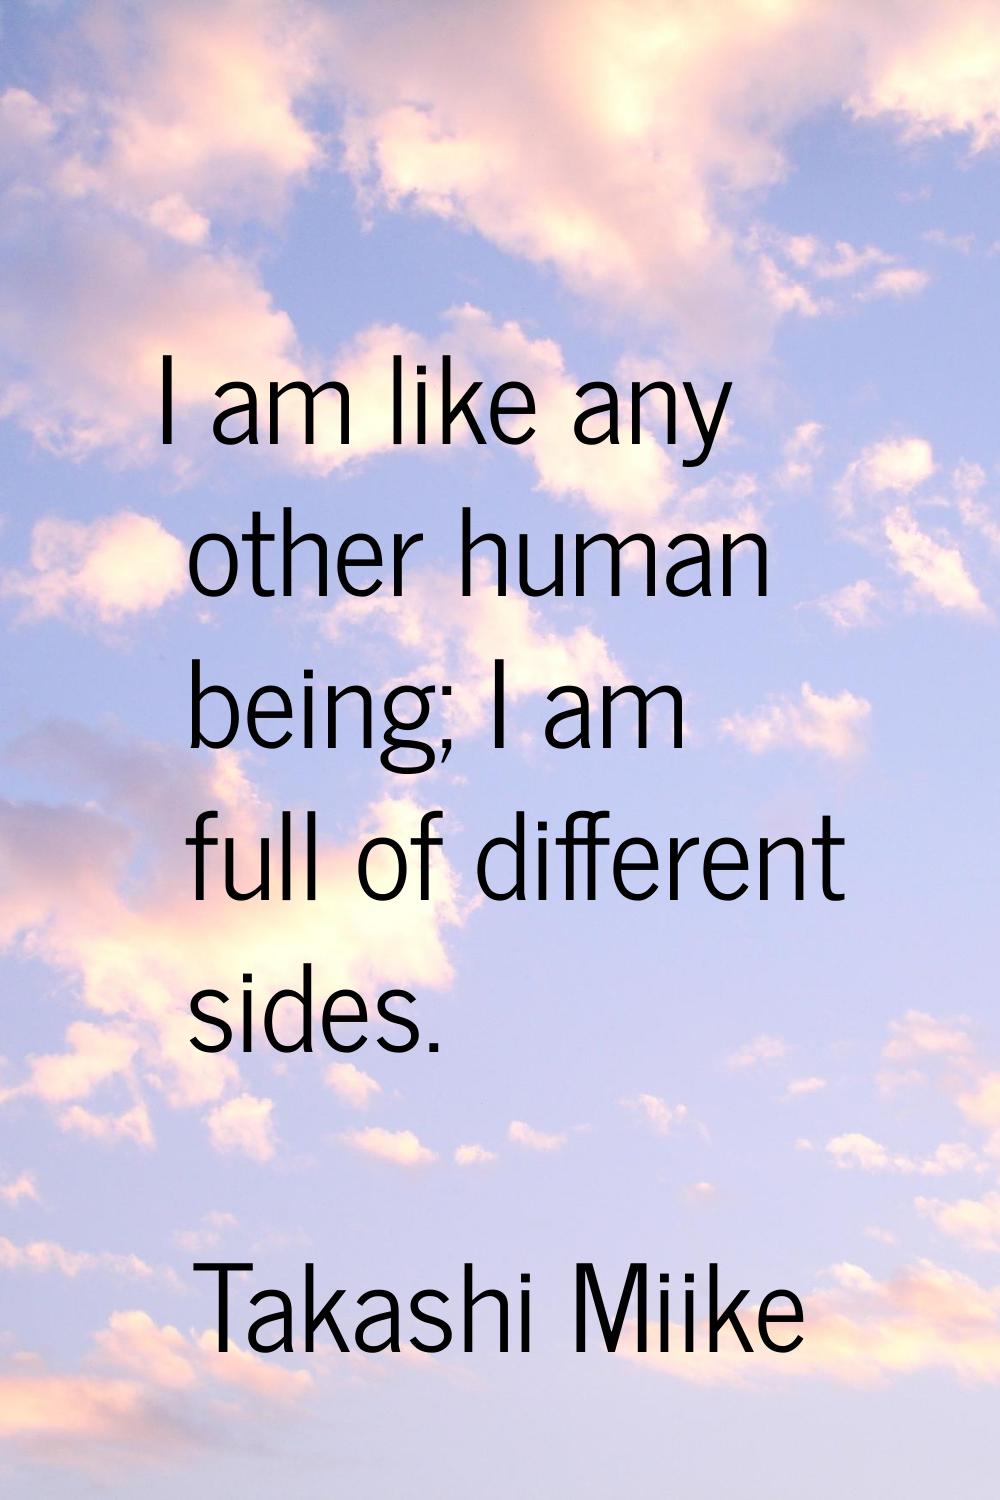 I am like any other human being; I am full of different sides.